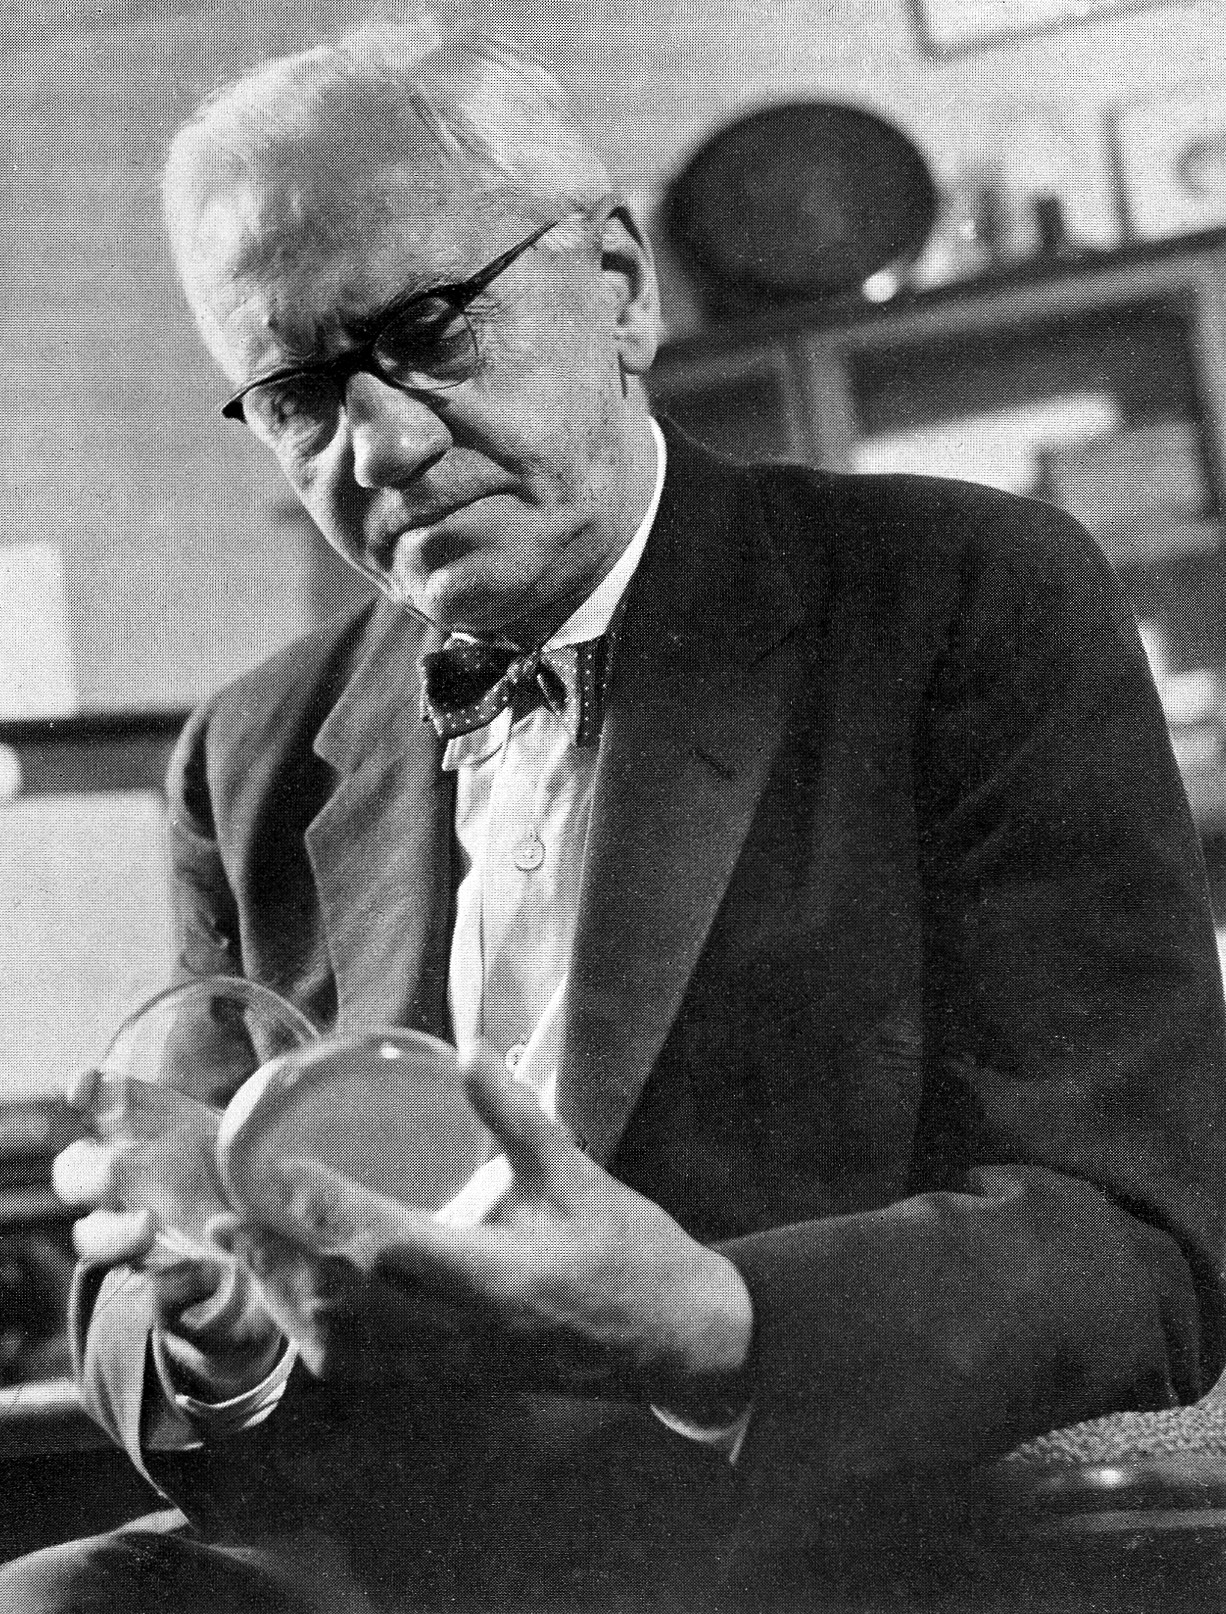 L0000655 Sir Alexander Fleming. Credit: Wellcome Library, London. Wellcome Images images@wellcome.ac.uk http://wellcomeimages.org Sir Alexander Fleming. Published:  -   Copyrighted work available under Creative Commons Attribution only licence CC BY 4.0 http://creativecommons.org/licenses/by/4.0/